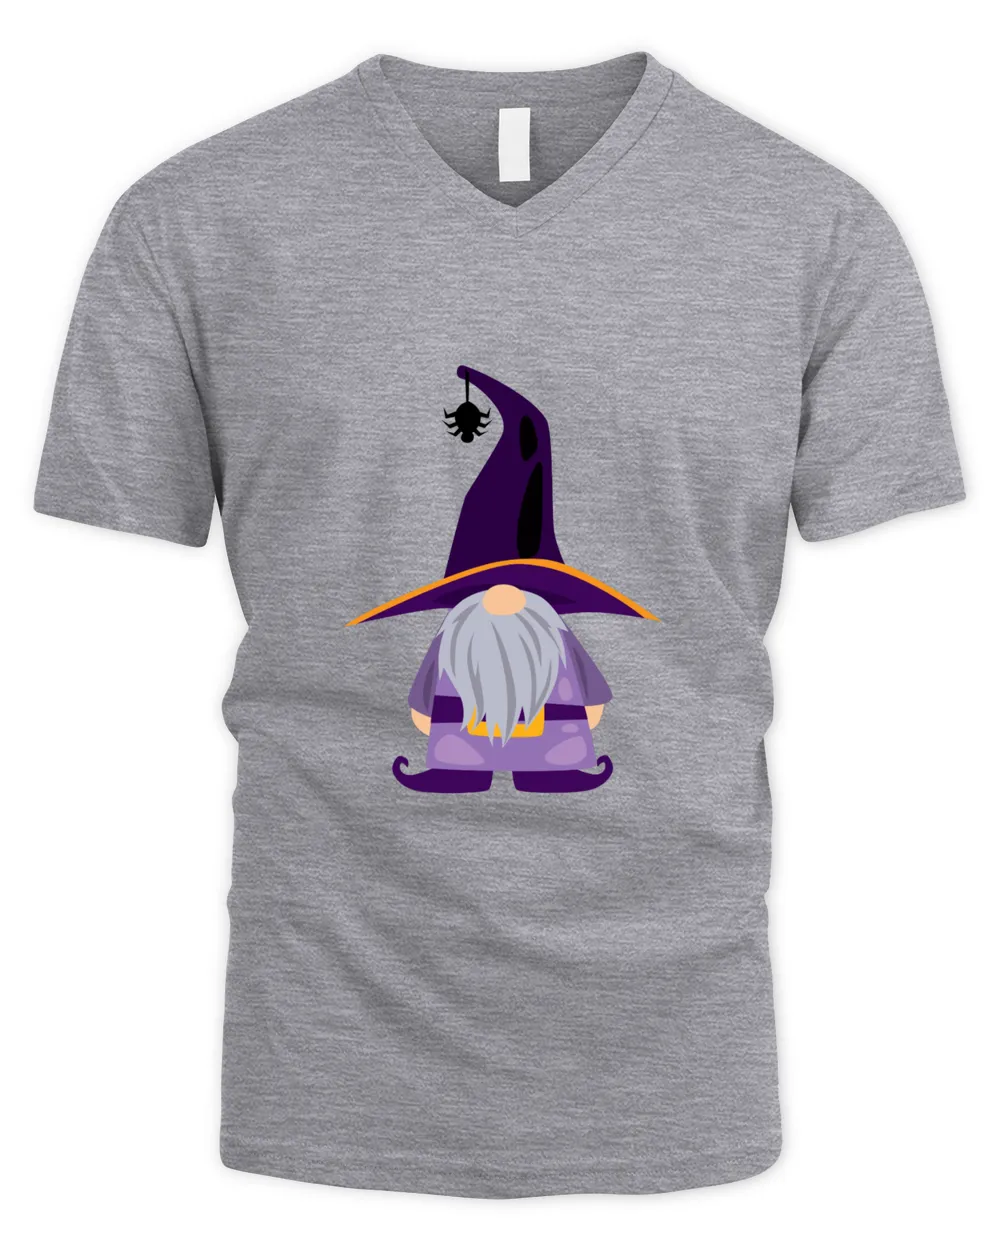 Witch Gnome t shirt hoodie sweater